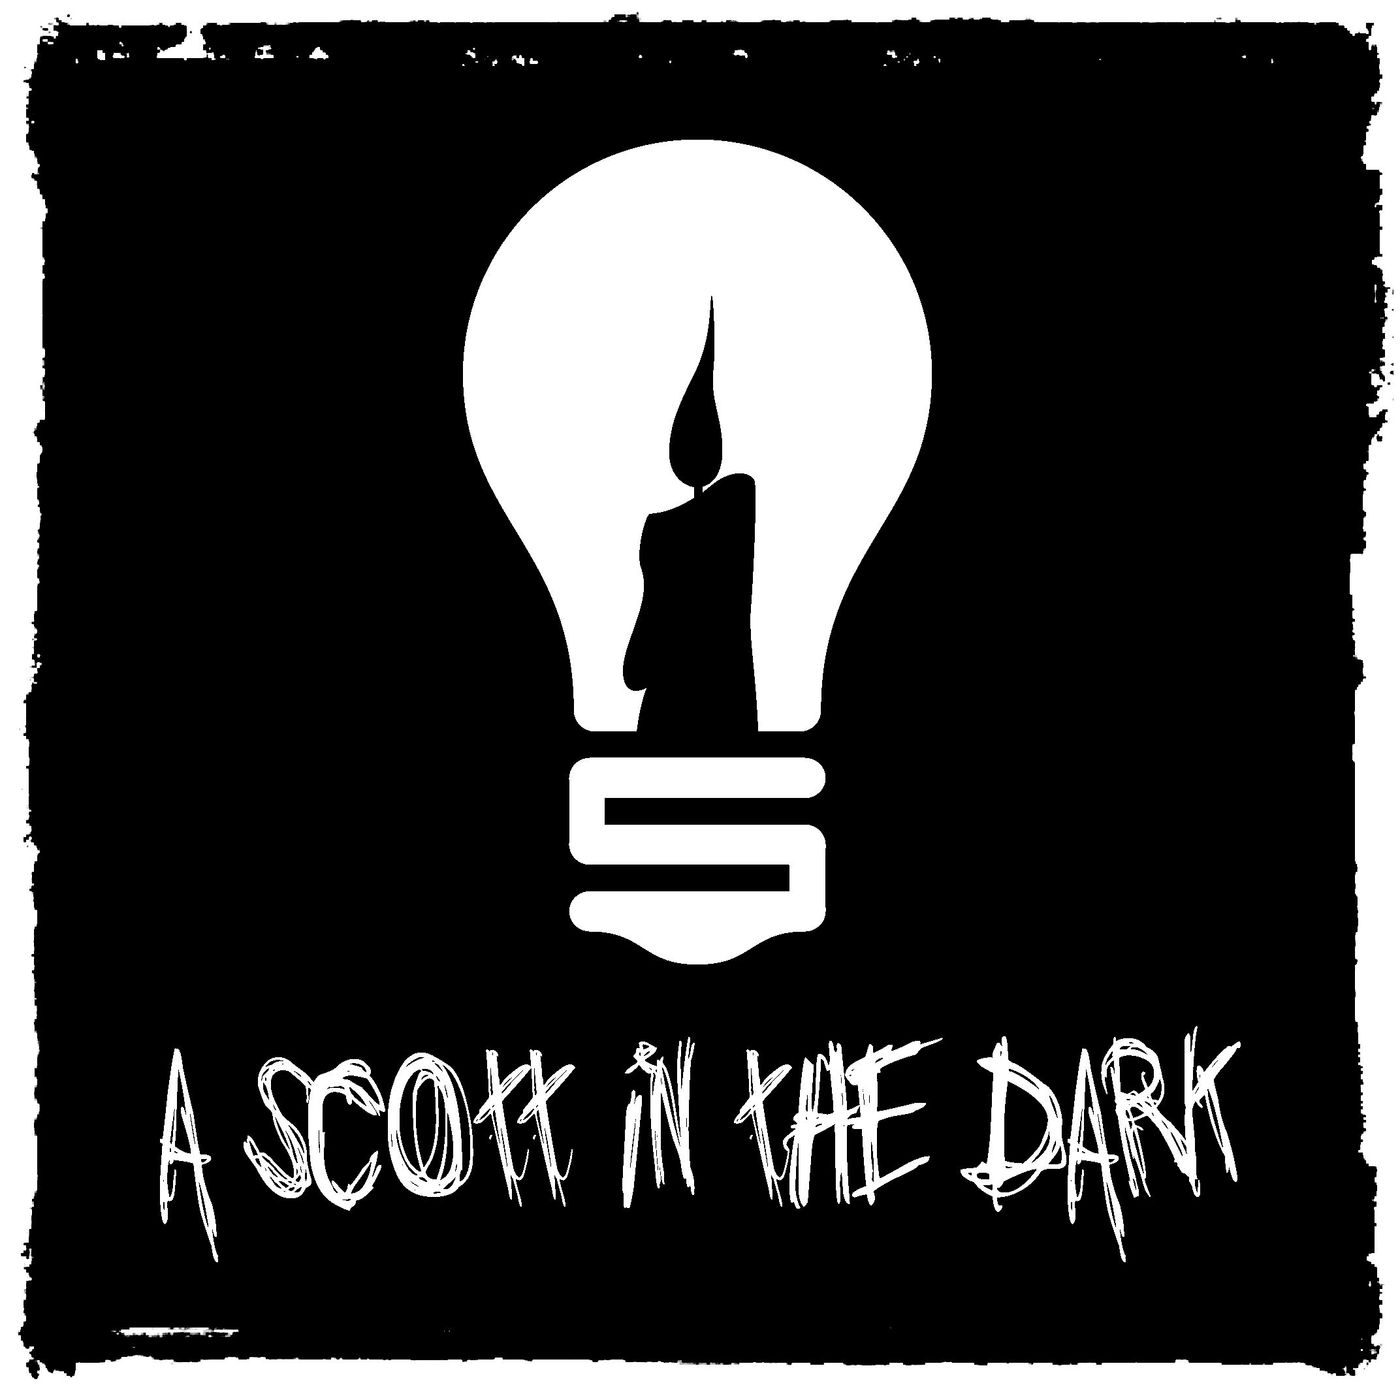 [A Scott in the Dark] Episode 20: from the League of Historic American Theatres Conference